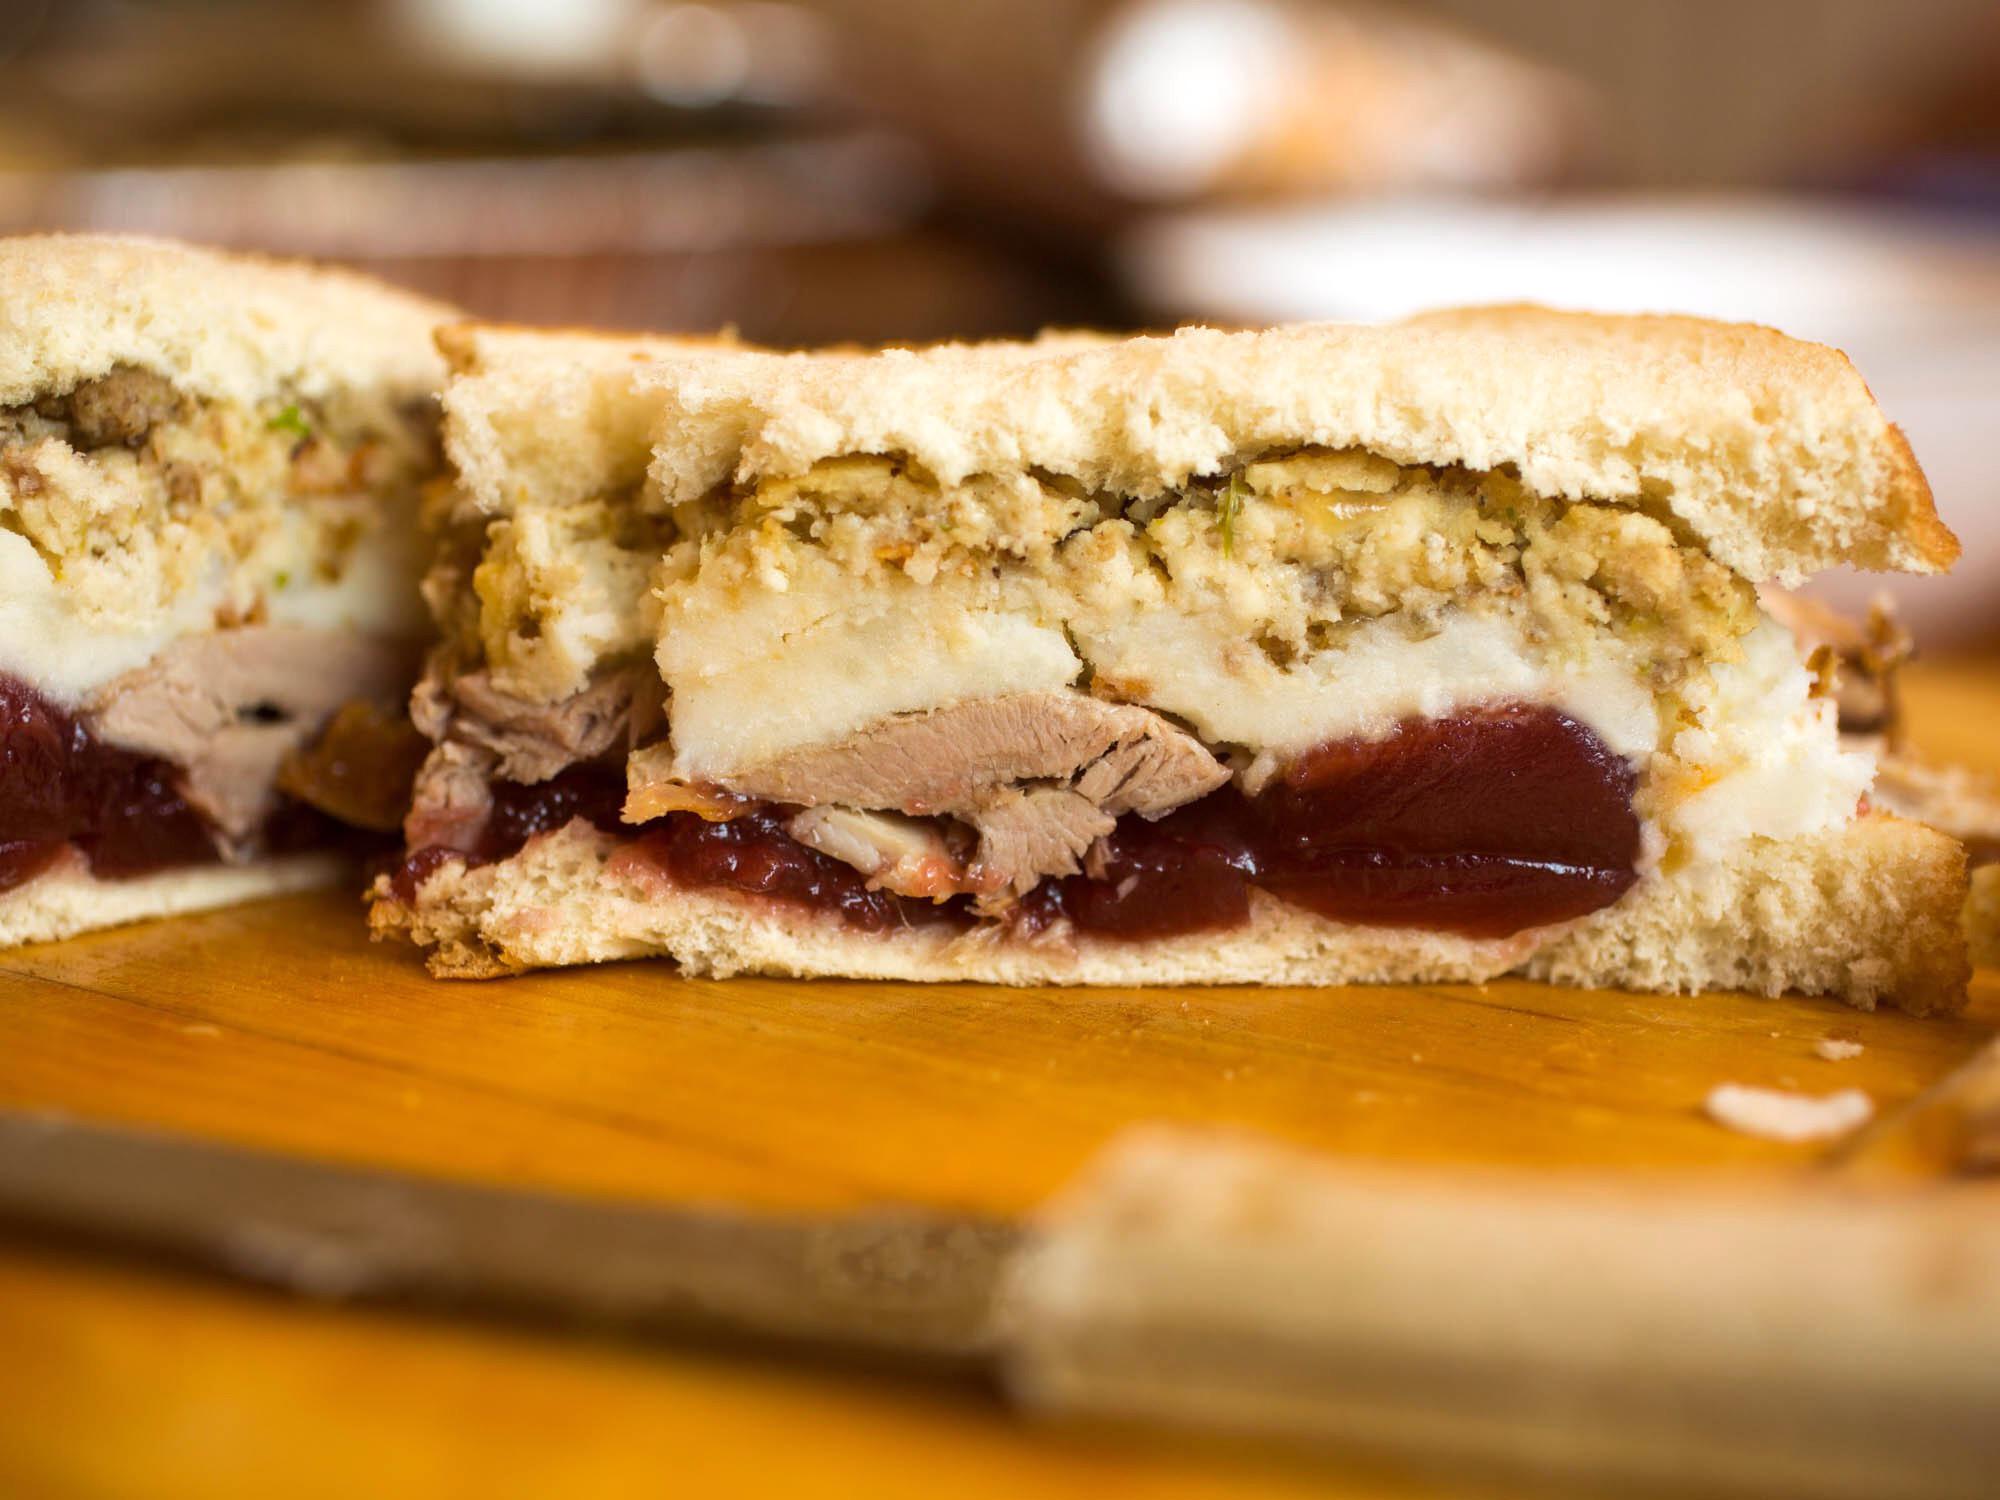 The greatest of holiday traditions: the Thanksgiving Leftovers Sandwich.